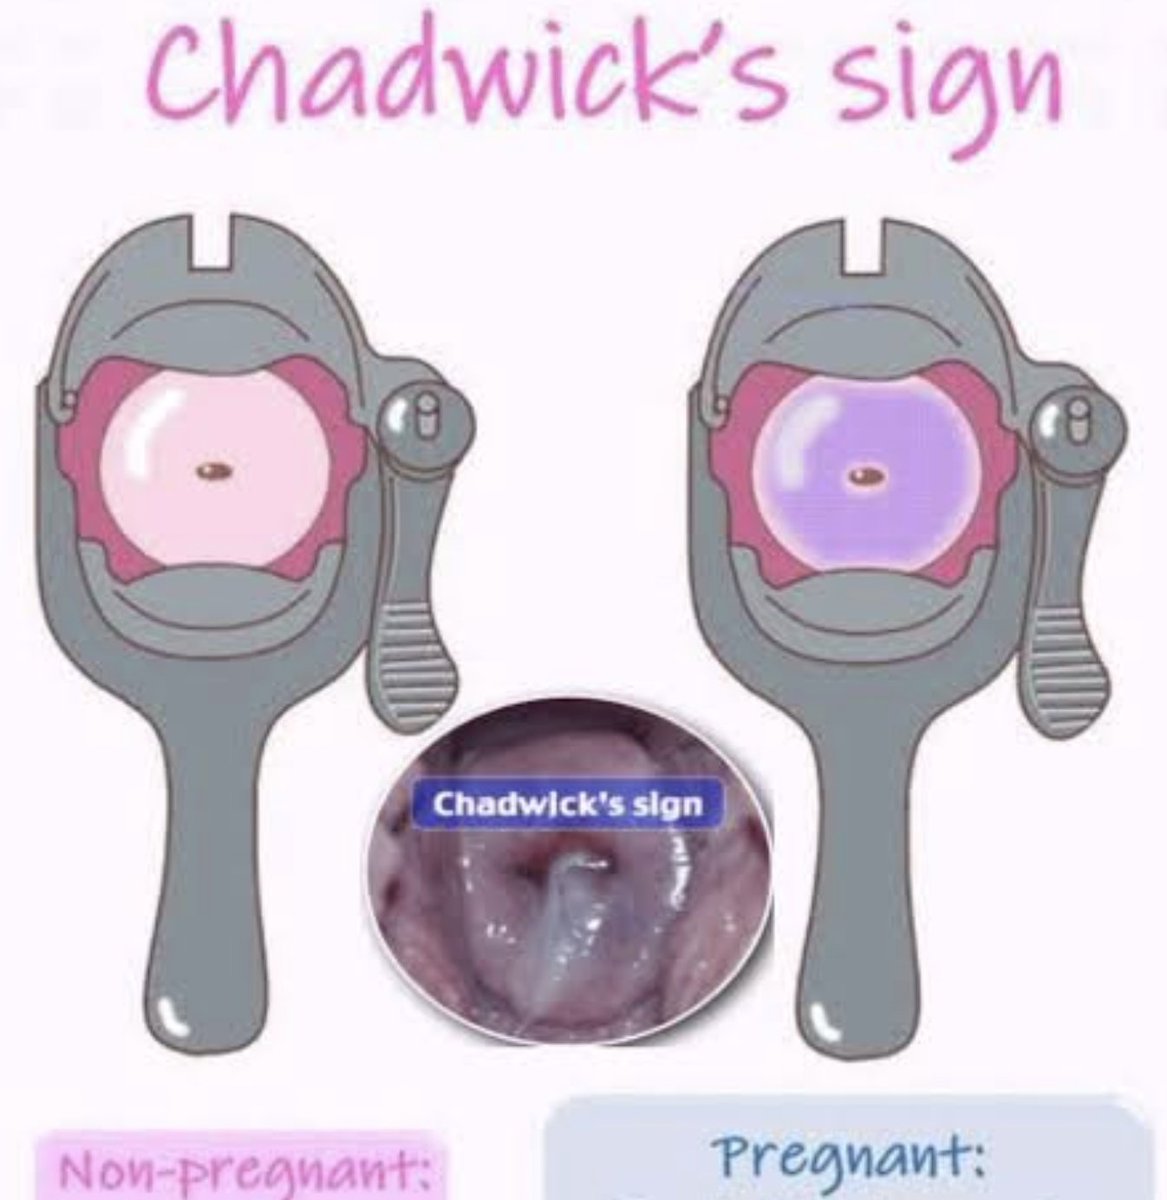 Chadwick's sign - bluish or purplish discoloration of vagina, labia and/or cervix in pregnancy via increased blood flow. May start at 6 - 8th wk of pregnancy (an early indicator of pregnancy)